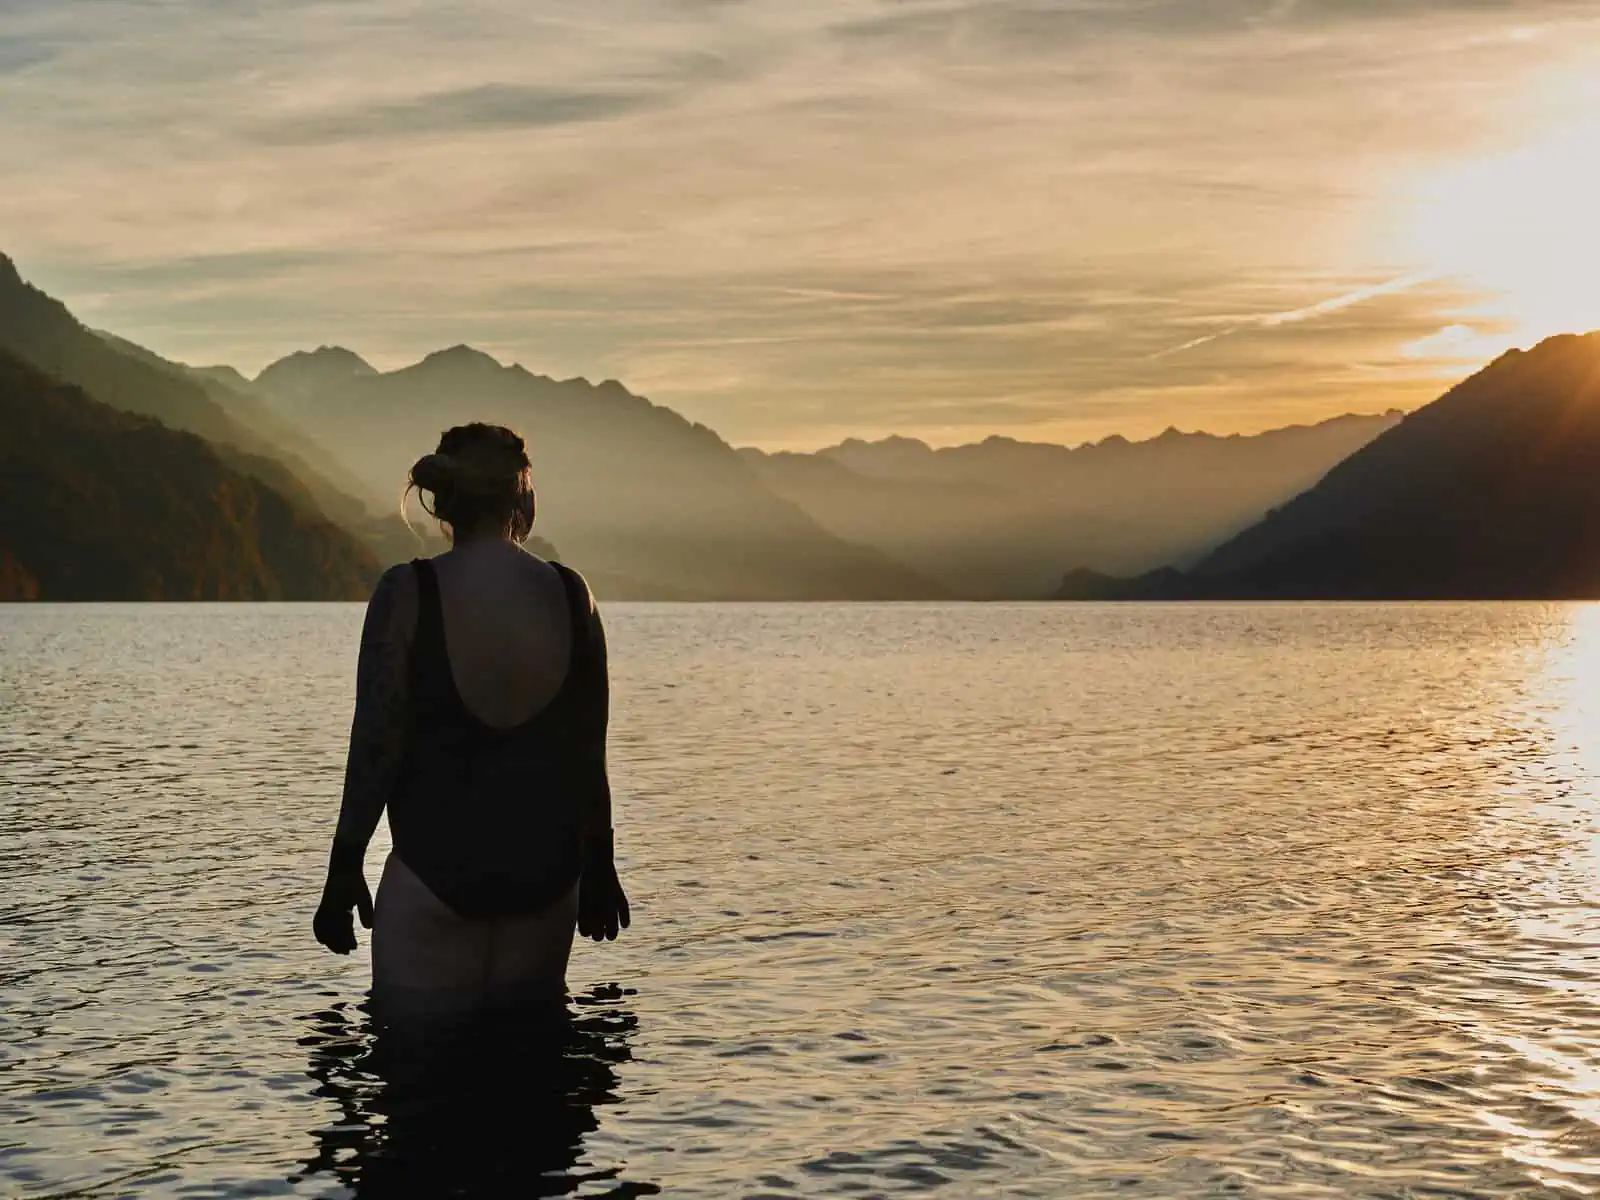 Five Accessible Wild Swimming Locations (with maps) to Try in the Bernese Alps, Switzerland - Fm Dsc F